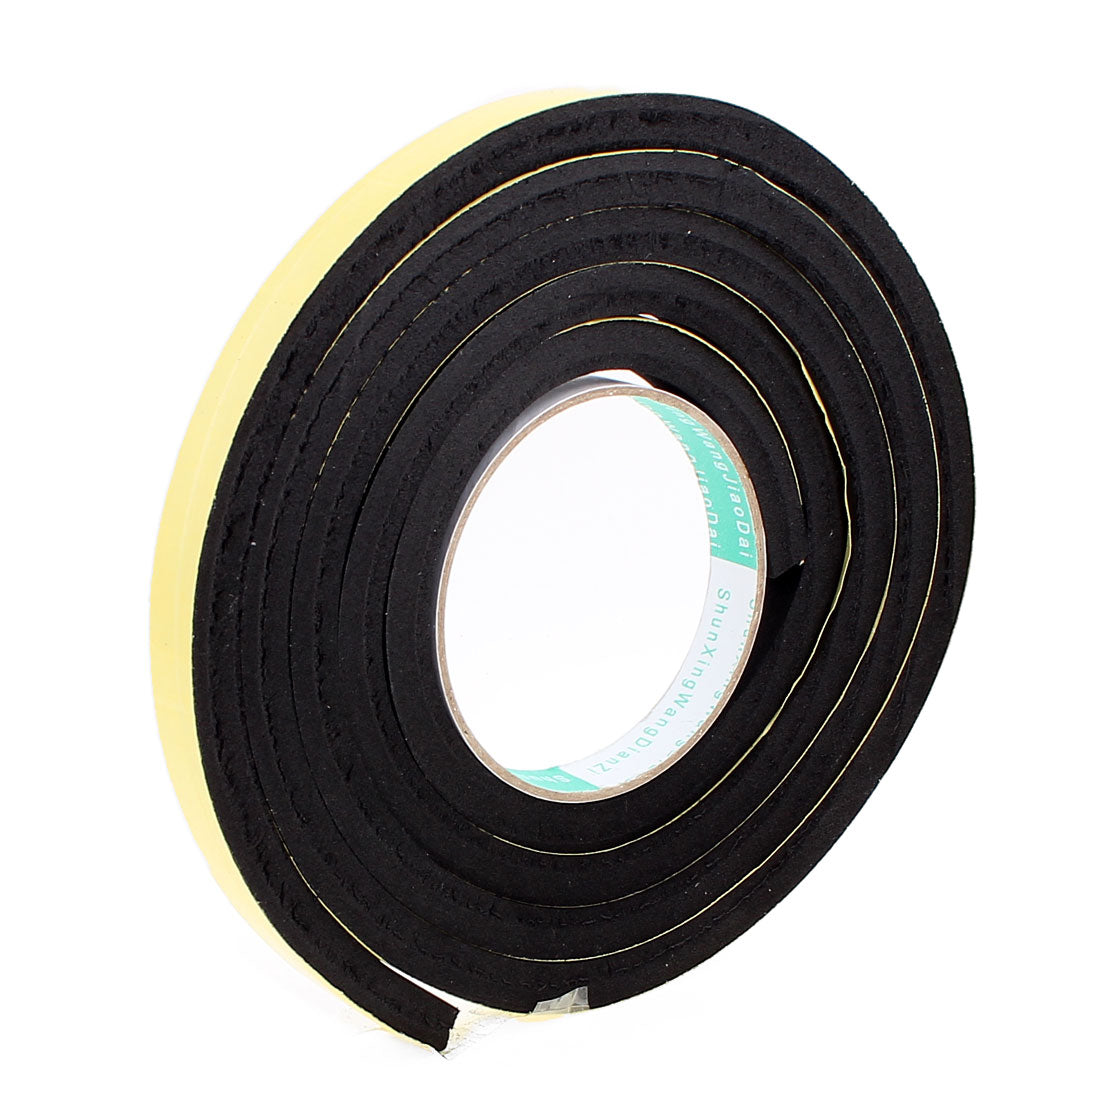 uxcell Uxcell 2 Meters 15mm x 10mm Single Side Adhesive EVA Foam Sealing